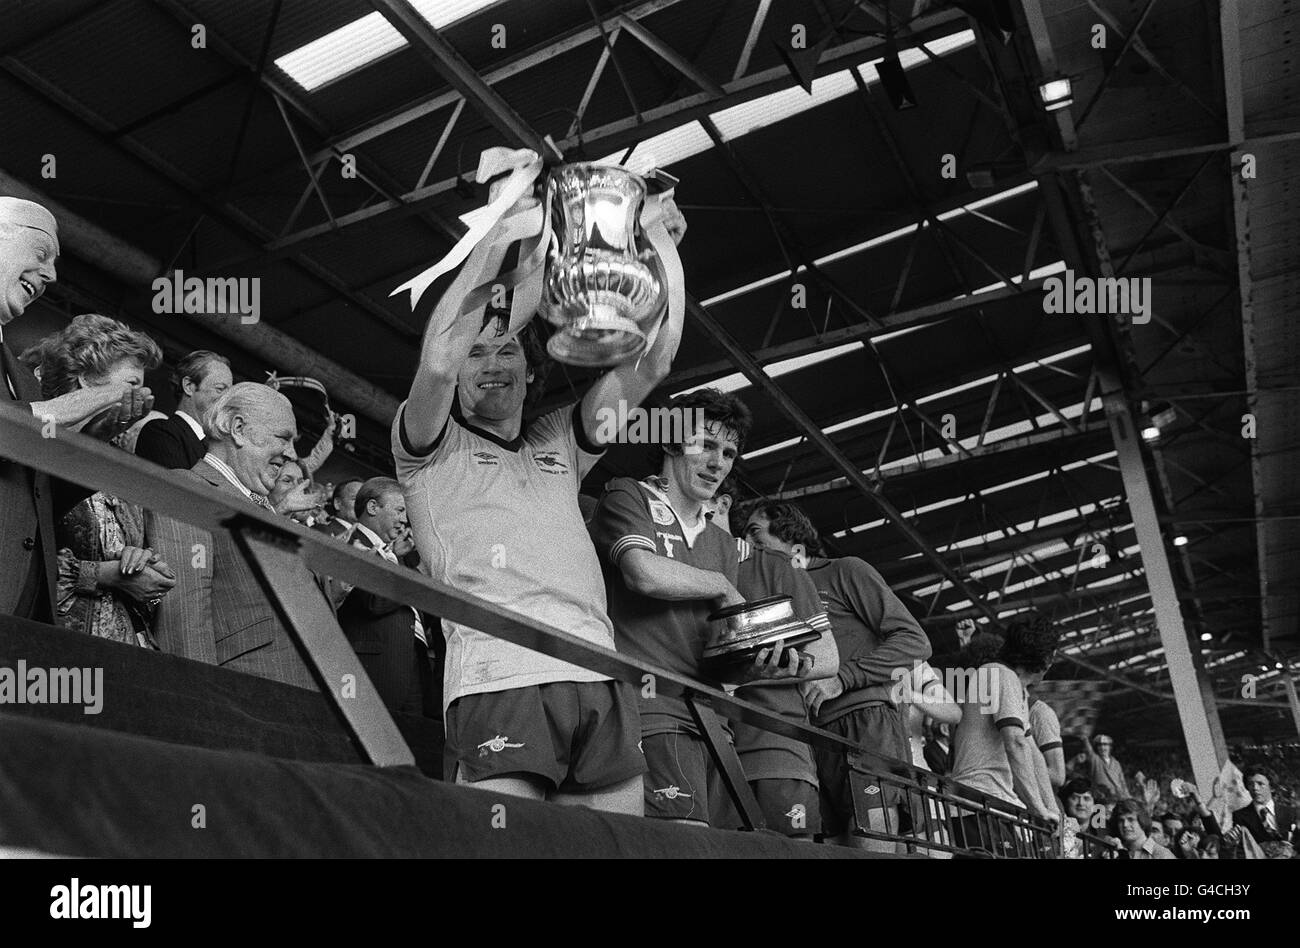 PA NEWS PHOTO 12/5/79 ARSENAL SKIPPER PAT RICE HOLDS ALOFT THE F.A. CUP TROPHY AT WEMBLEY, LONDON AFTER HIS TEAM BEAT MANCHESTER UNITED 3-2 IN THE FINAL Stock Photo